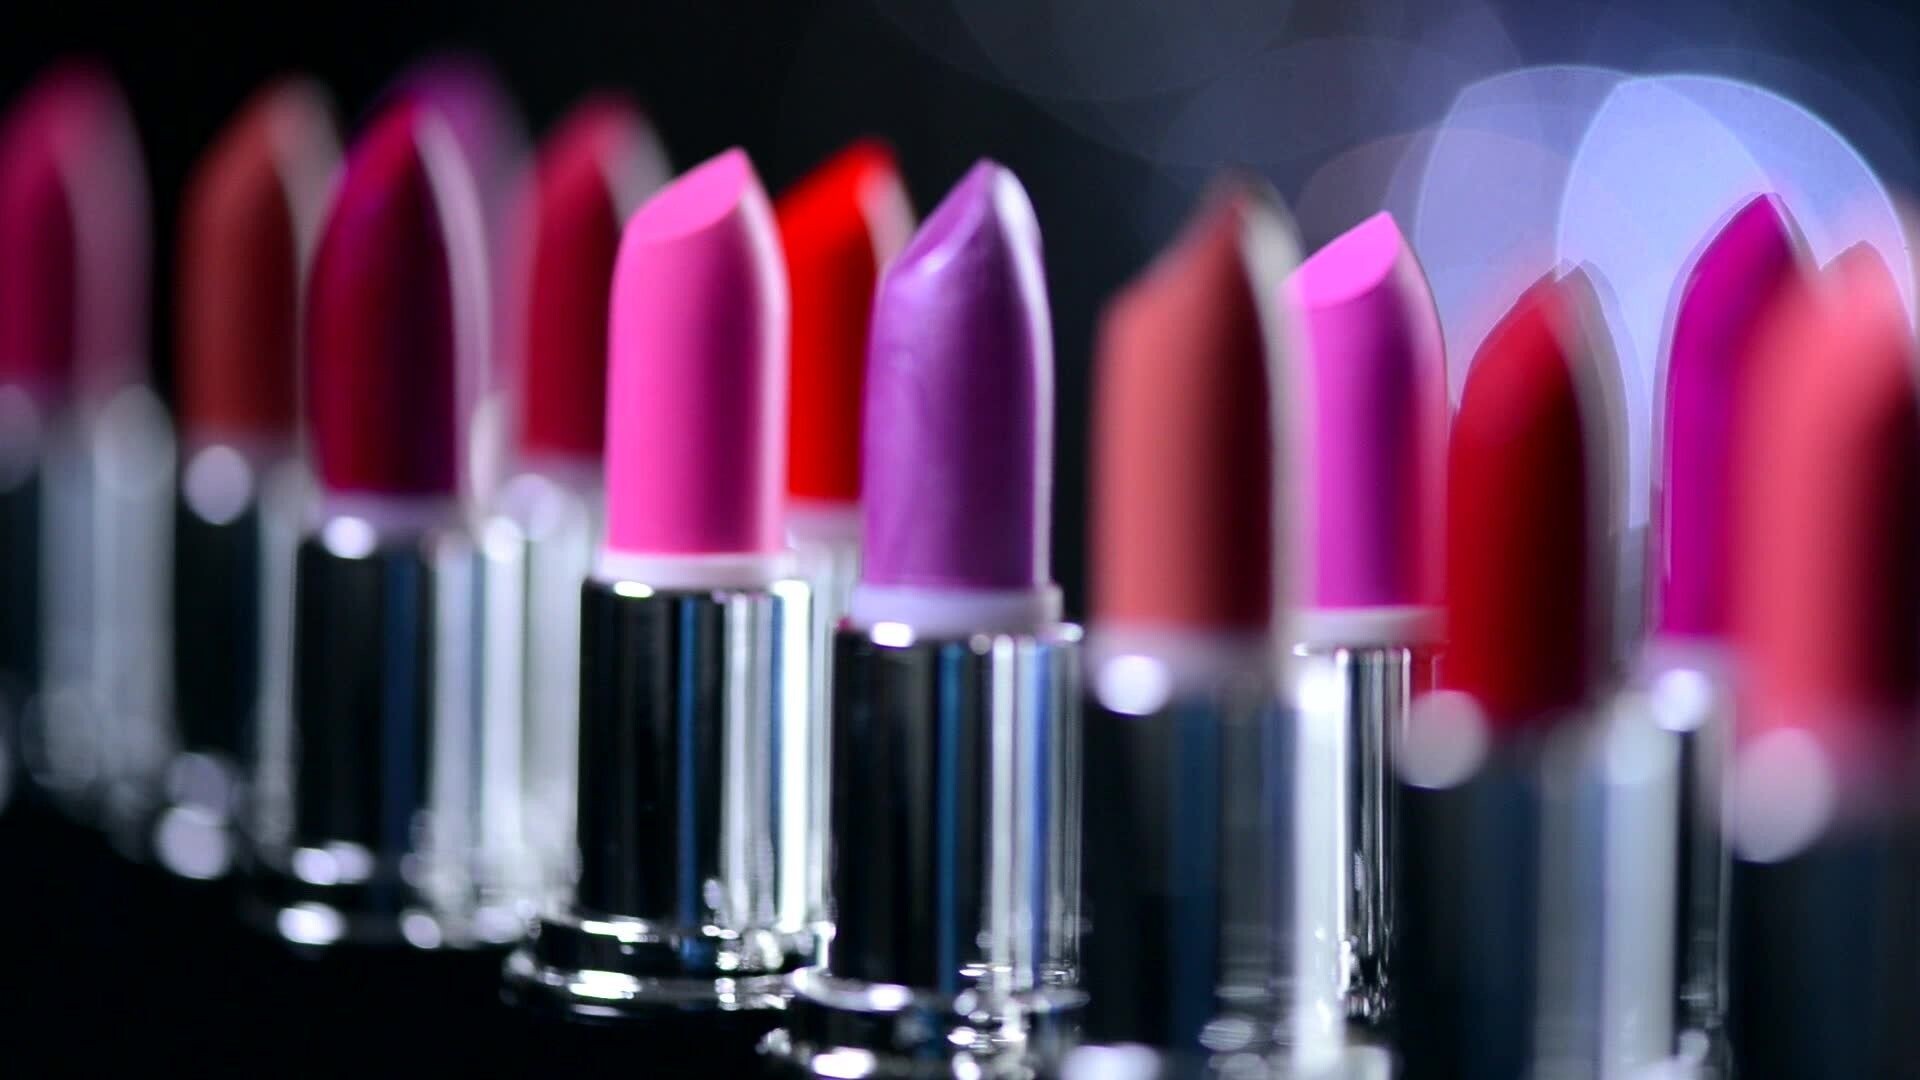 Lipstick: A variety of lipsticks, Shades and textures, Colored cosmetic applied to the lips from a small solid stick. 1920x1080 Full HD Background.